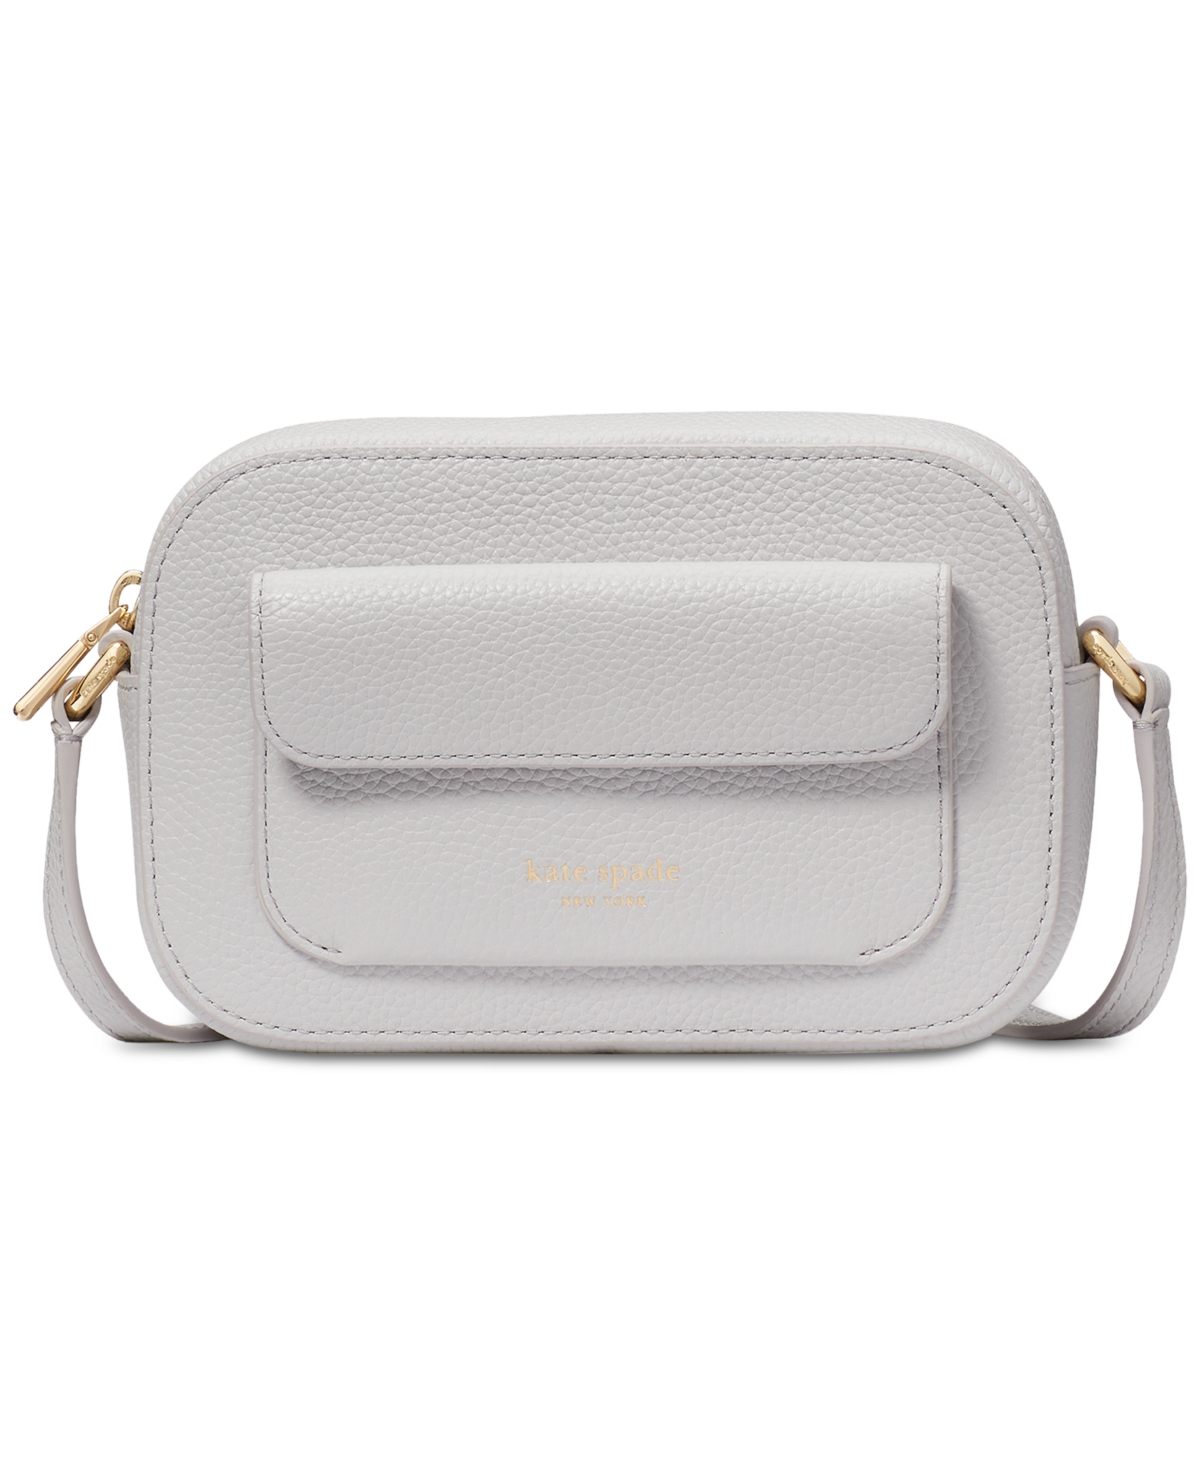 Kate Spade Ava Pebbled Leather Crossbody In North Star